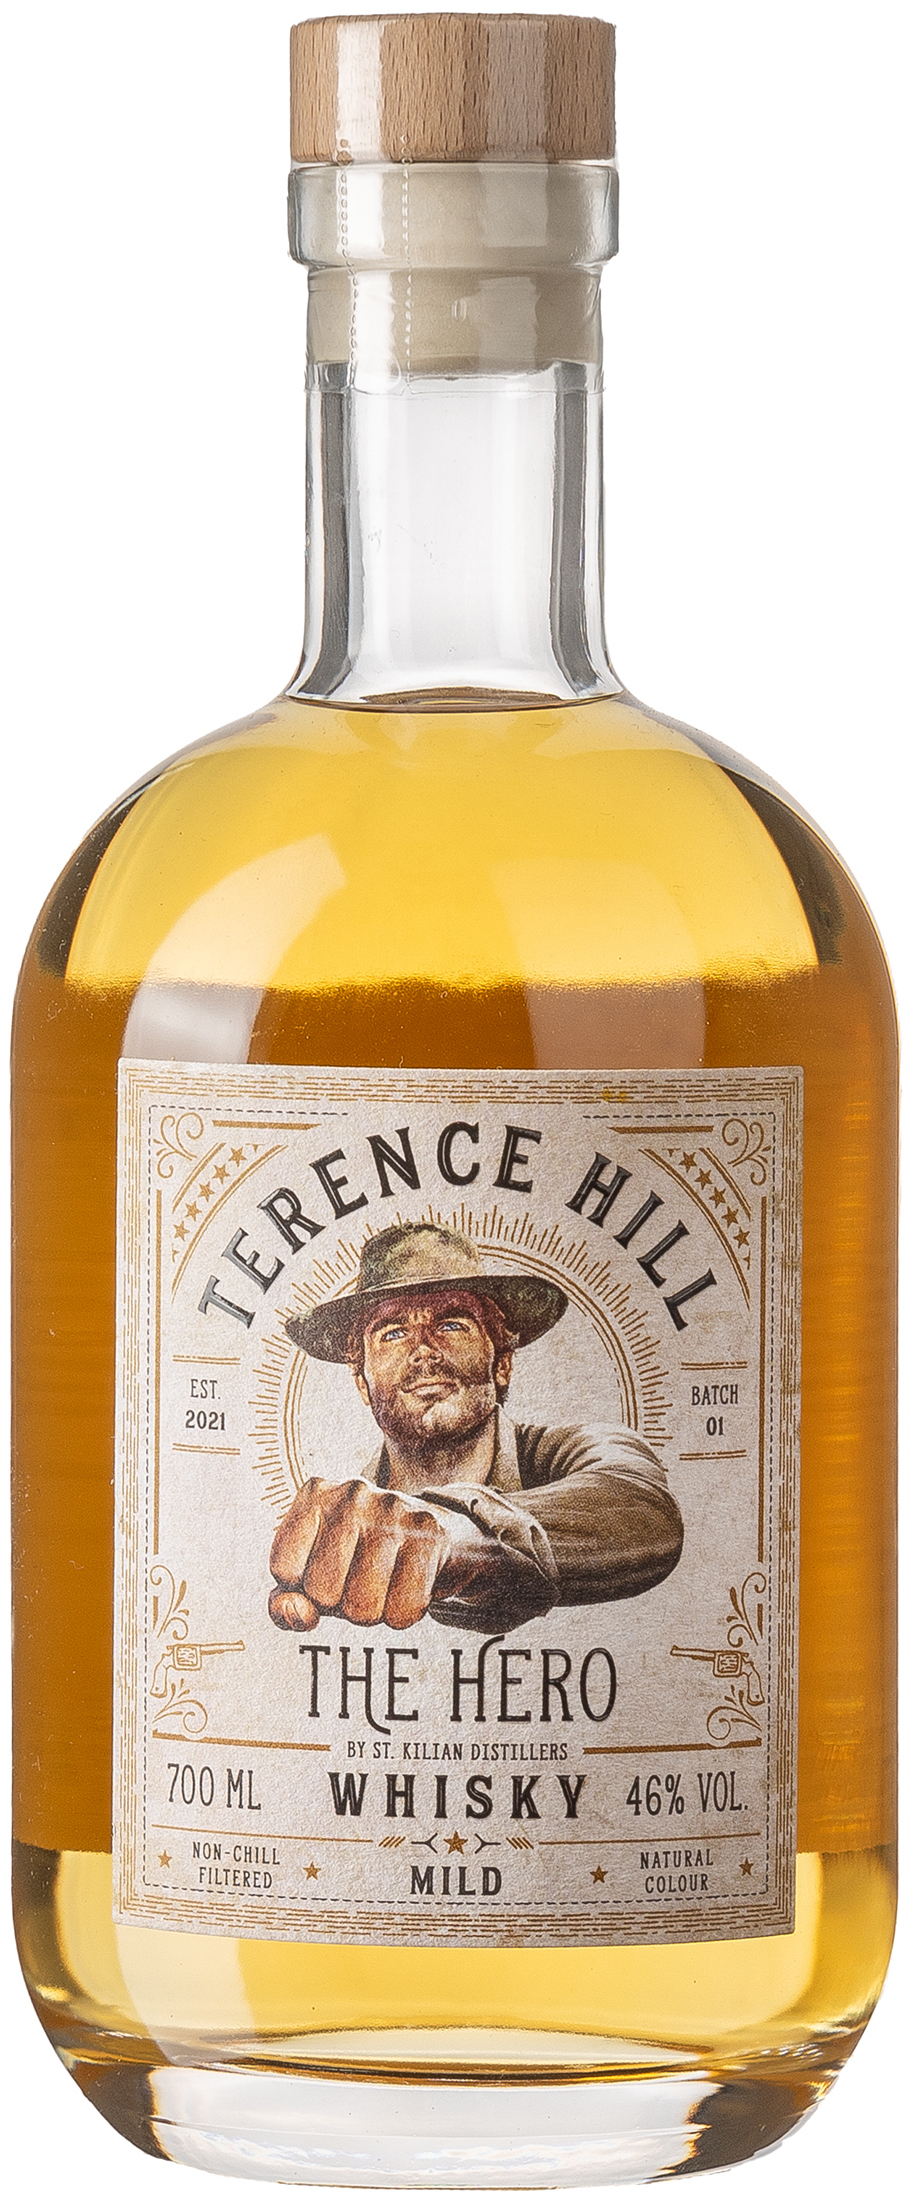 Terence Hill The Hero Whisky Mild 46% vol. 0,7L